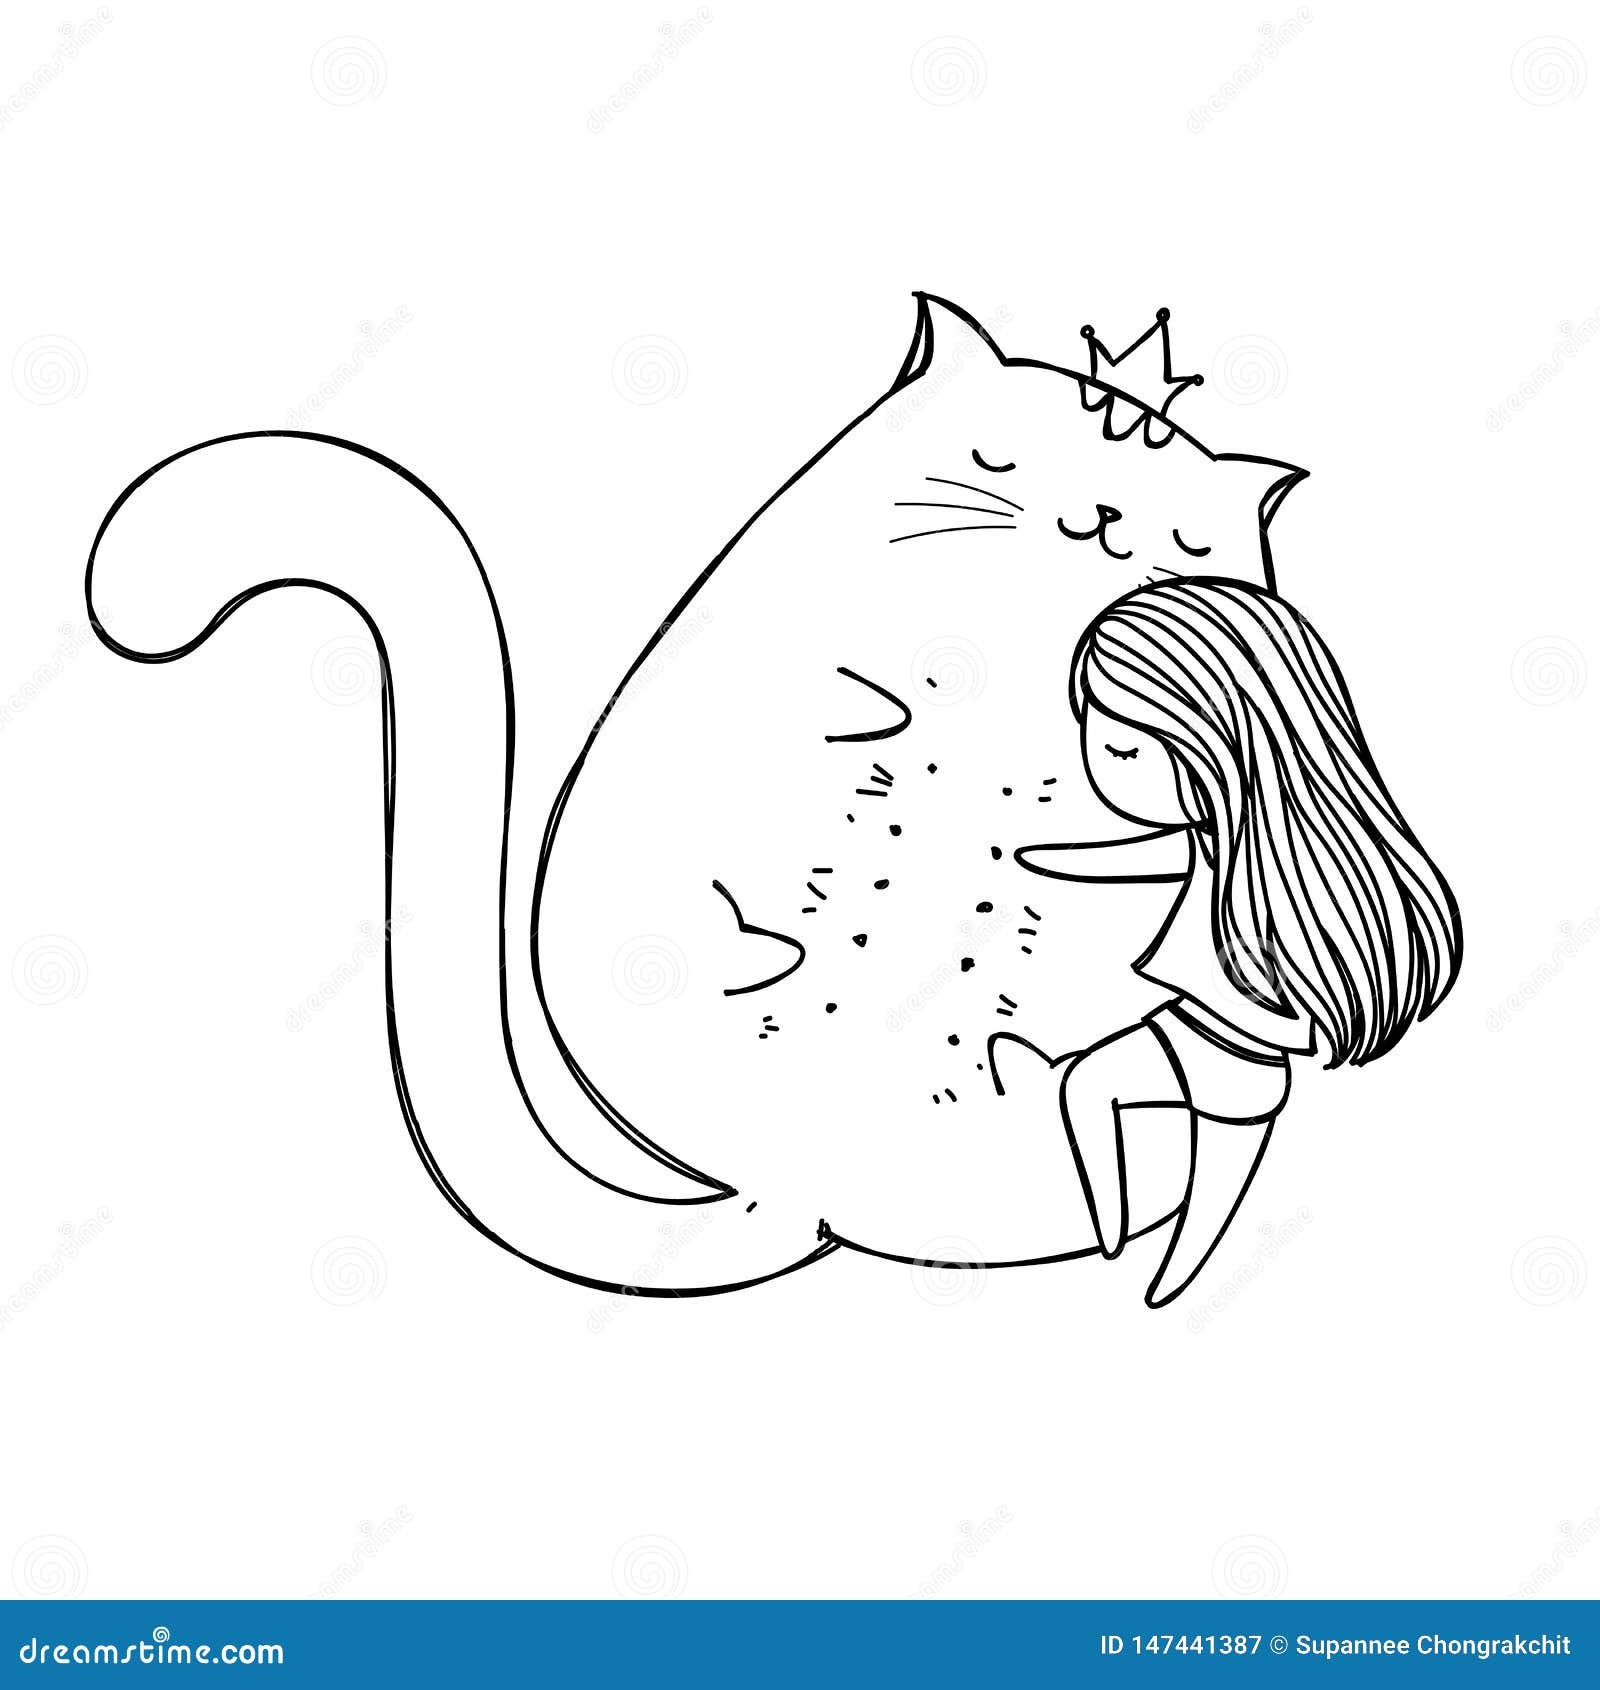 Cute Cartoon Hand Drawn Doodle Girl and Big Cat. Girl Hugging a Cat Cartoon  Hand Drawn. Kawaii Cartoon Sleeping Stock Illustration - Illustration of  banner, graphic: 147441387